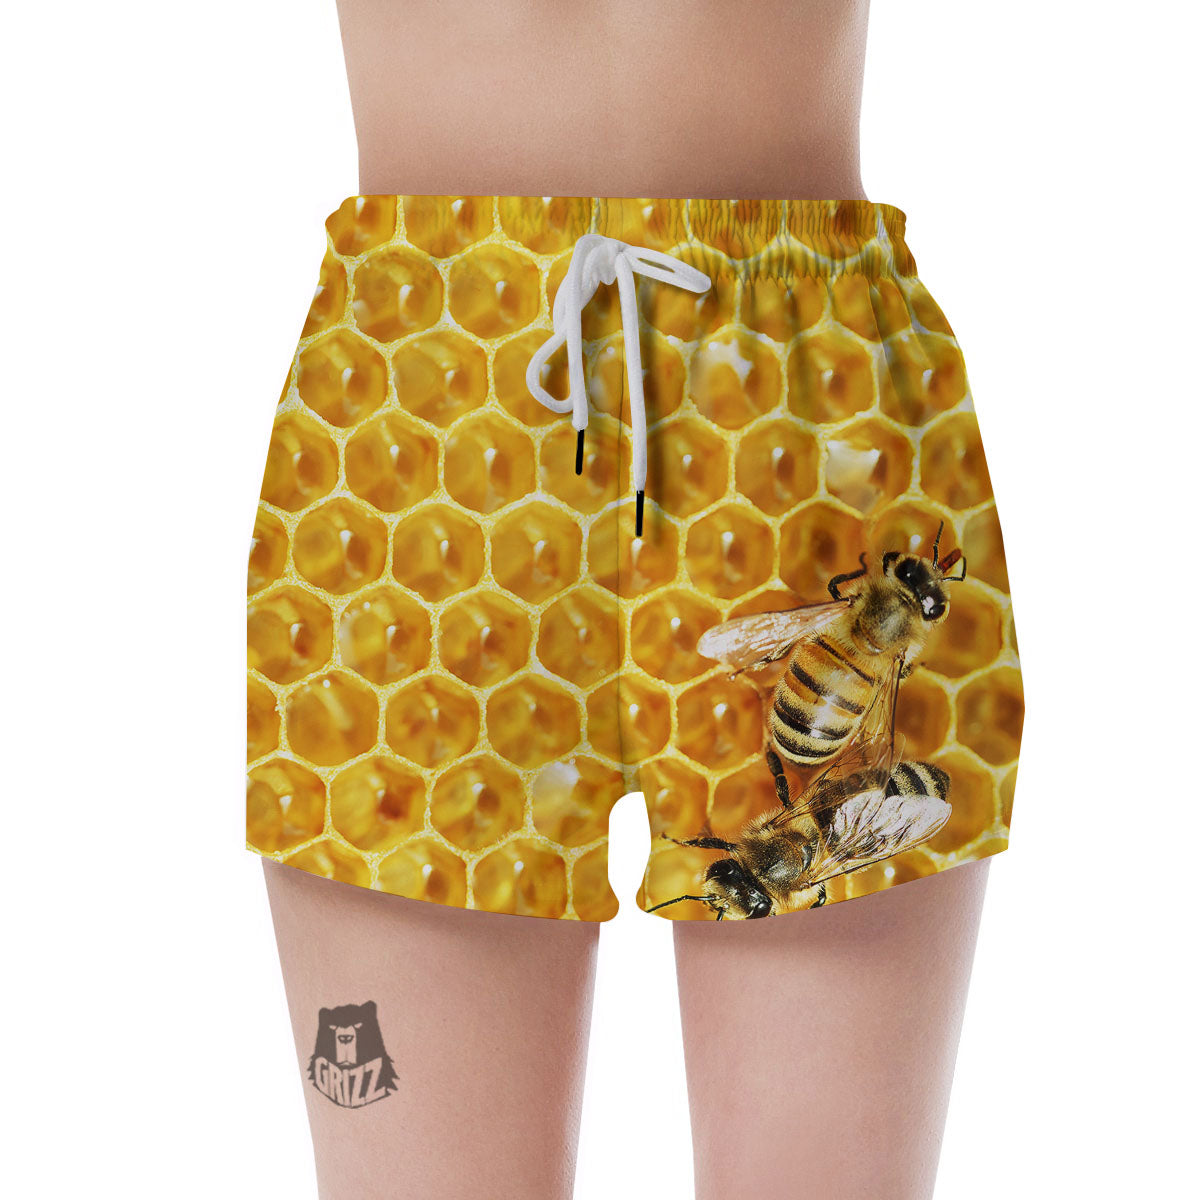 Honeycomb And Bees Print Women's Shorts – Grizzshopping